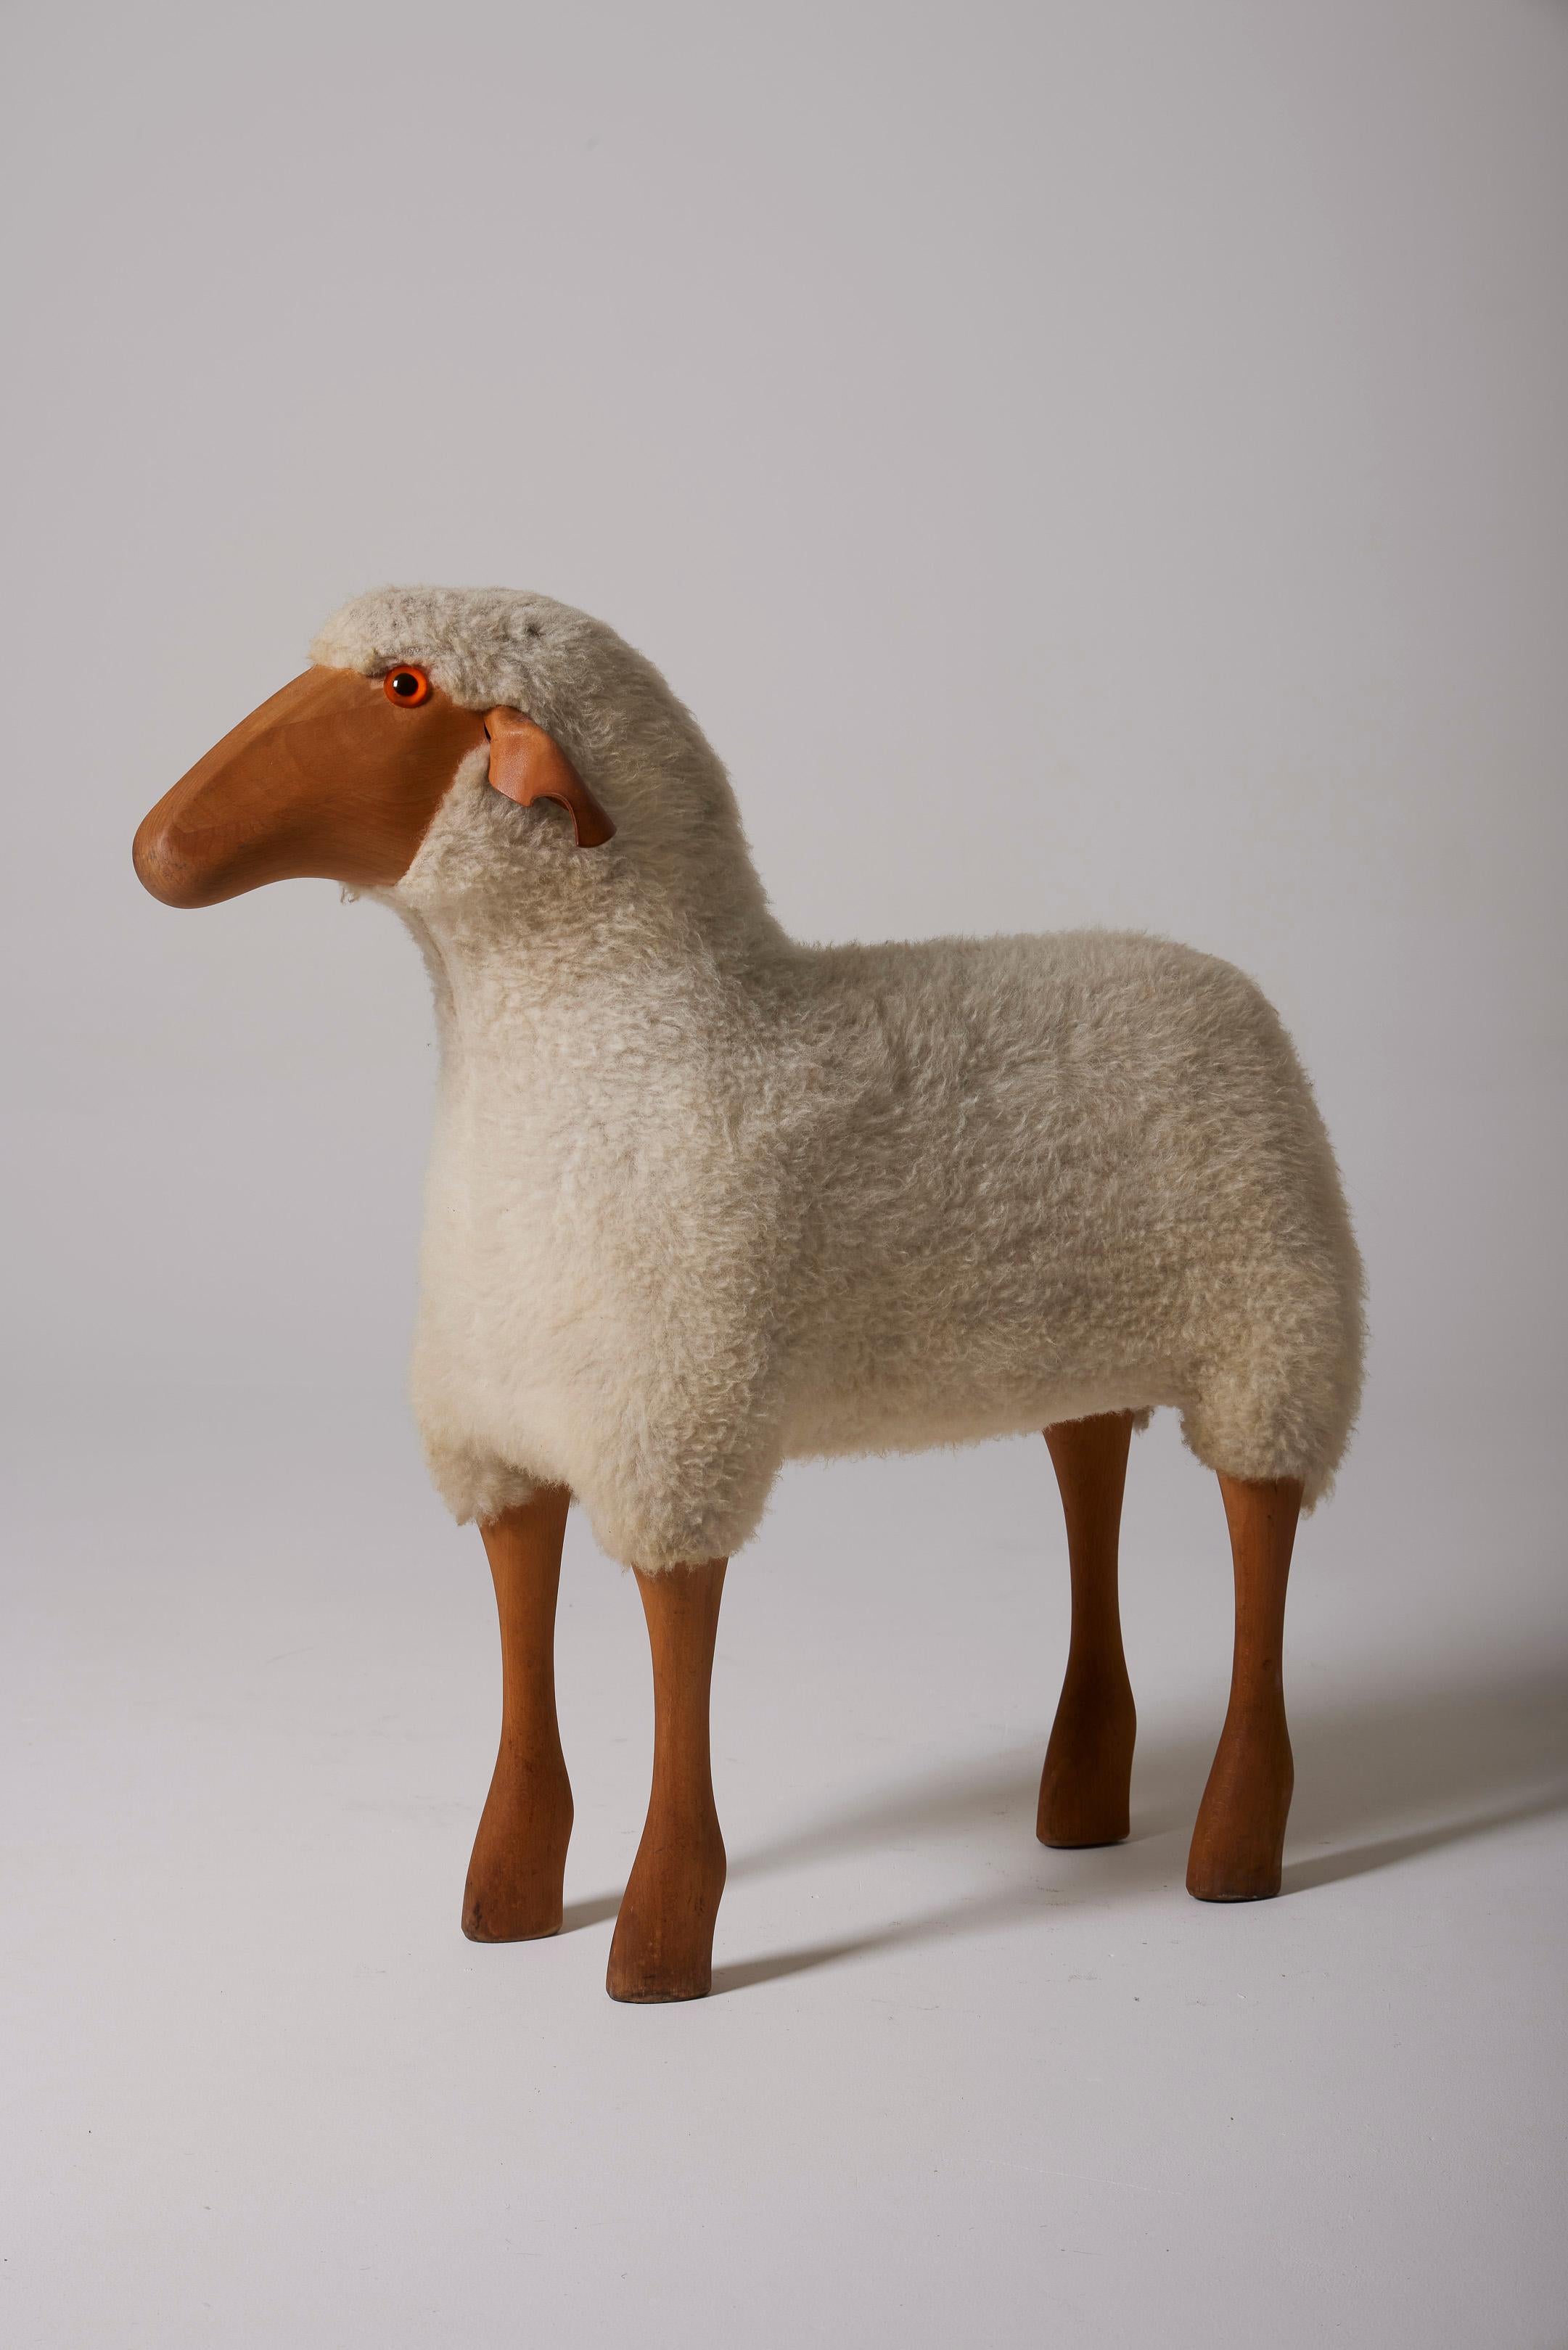 Wooden sheep sculpture by German designer Hanns-Peter Krafft for Meier in the 1980s (1982). This sheep has a wooden structure and a wool covering. Hanns-Peter Krafft is a German artist and designer who collaborates with Meier.Germany, specializing